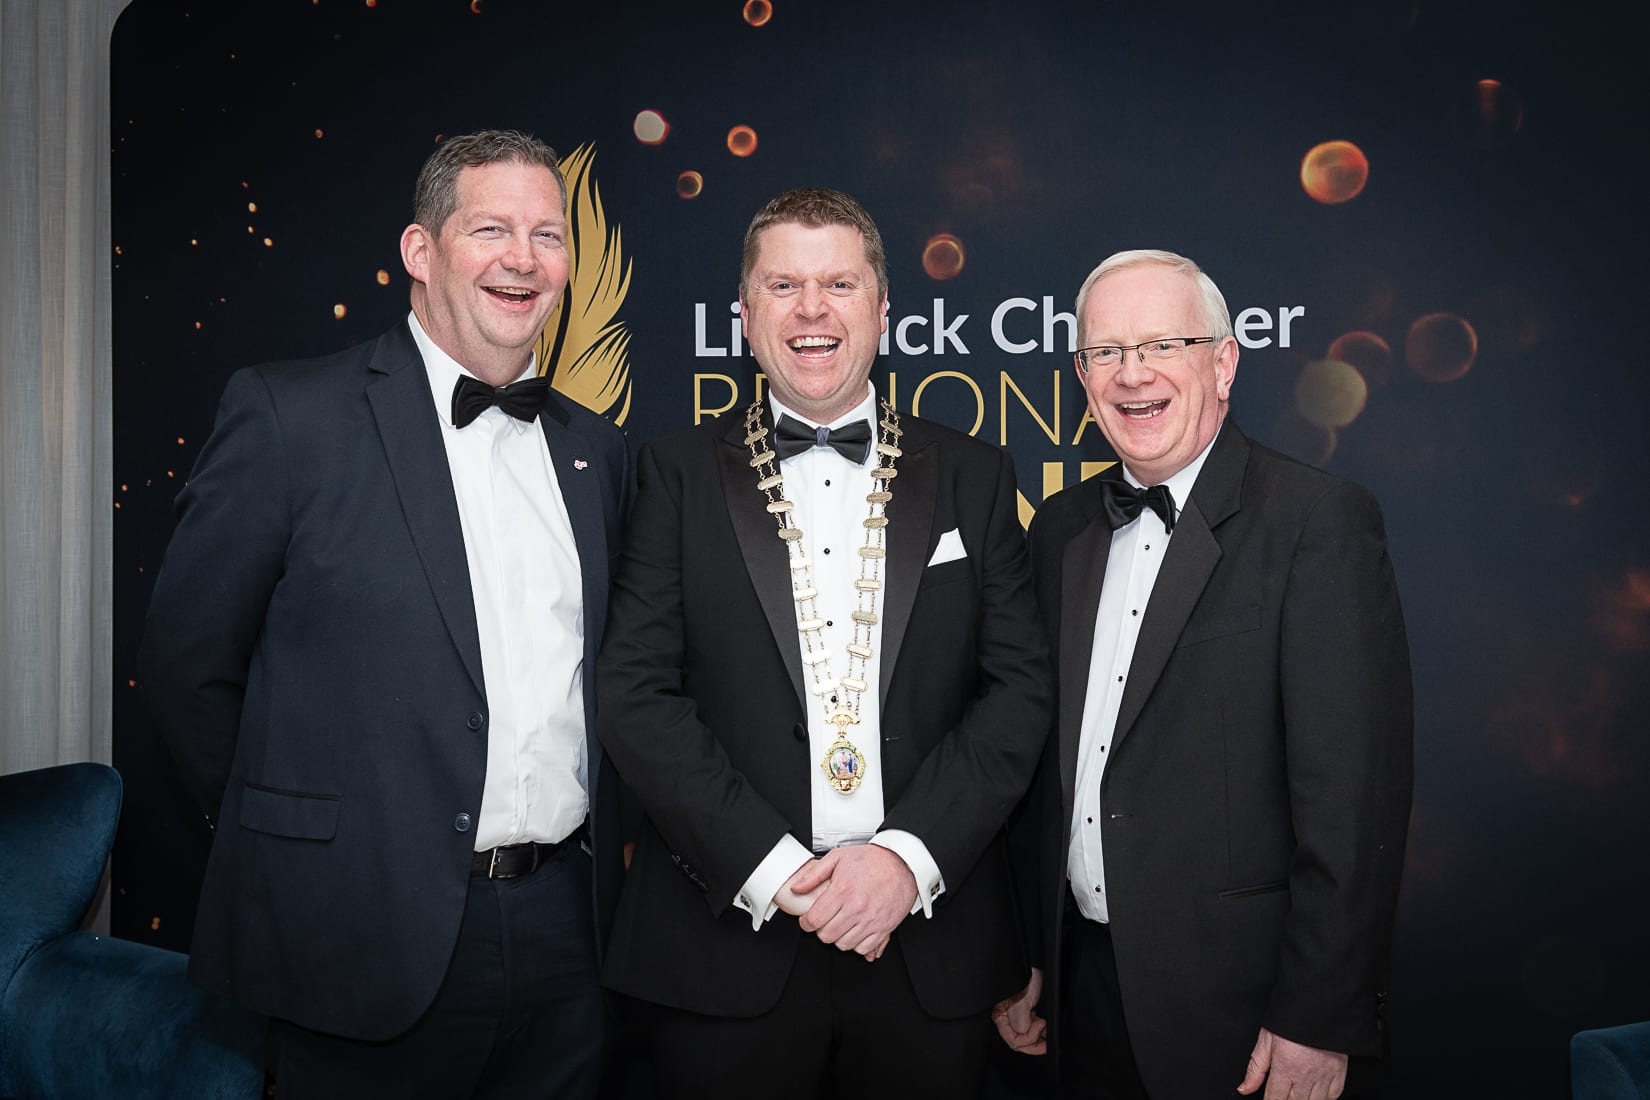 No repro fee-Limerick Chamber President’s Dinner
and Limerick Chamber Regional Business Awards 2019 which was held in the Strand Hotel on Friday 15th November /  Limerick Institute of Technology Sponsors/  - From Left to Right: Dr Liam Browne  - Vice President LIT, Eoin Ryan - President Limerick Chamber, Professor Vincent Cunnane- President LIT, 
Photo credit Shauna Kennedy